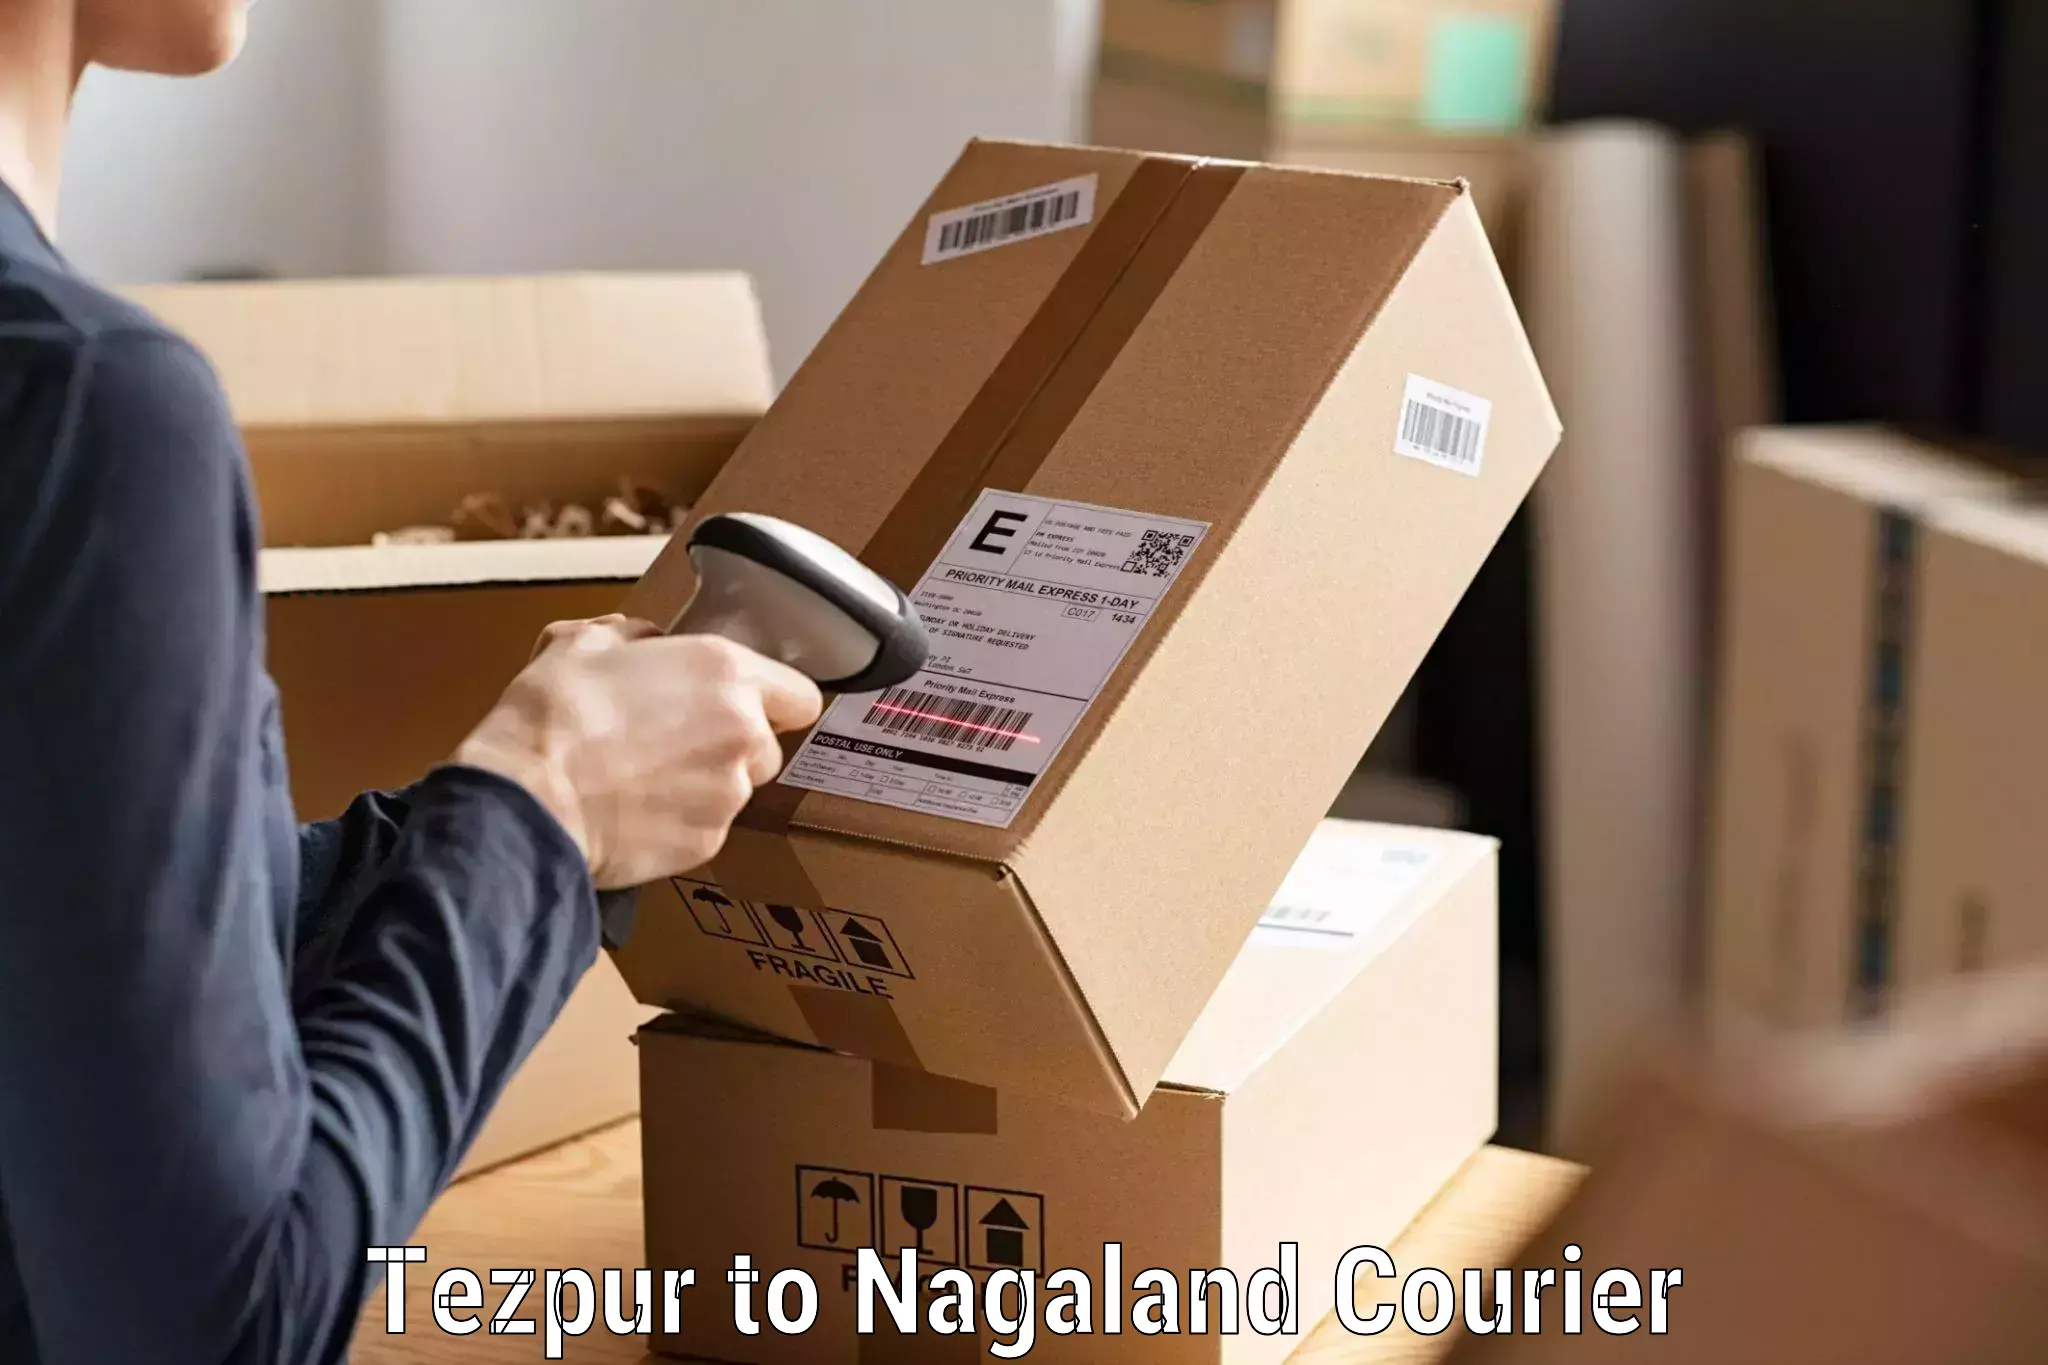 Flexible delivery schedules Tezpur to Dimapur